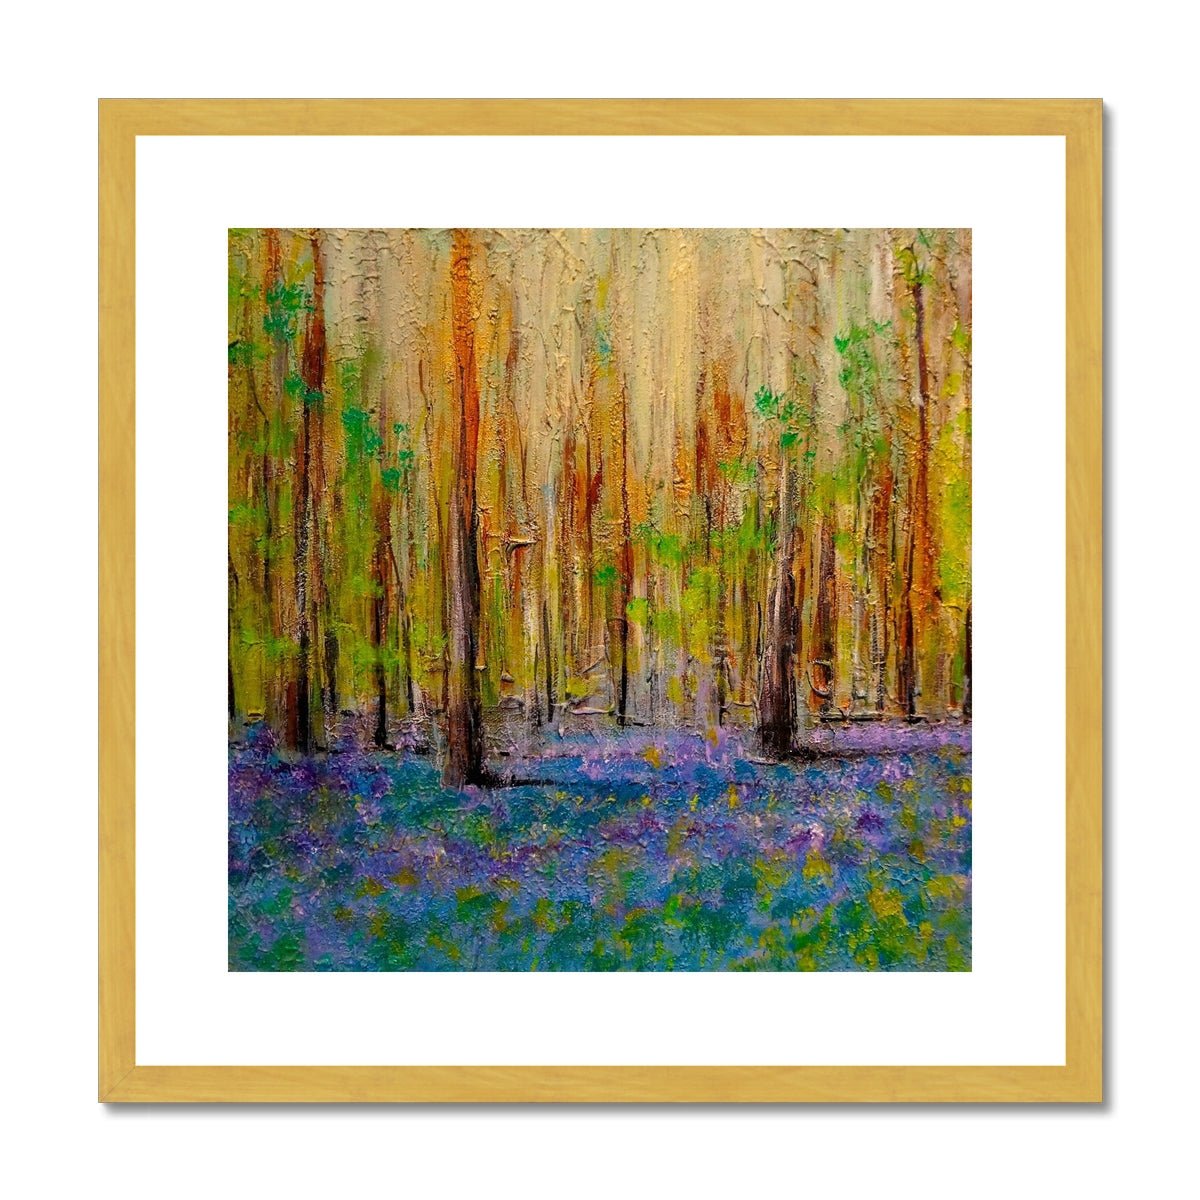 Highland Bluebells Painting | Antique Framed & Mounted Prints From Scotland-Antique Framed & Mounted Prints-Scottish Highlands & Lowlands Art Gallery-20"x20"-Gold Frame-Paintings, Prints, Homeware, Art Gifts From Scotland By Scottish Artist Kevin Hunter